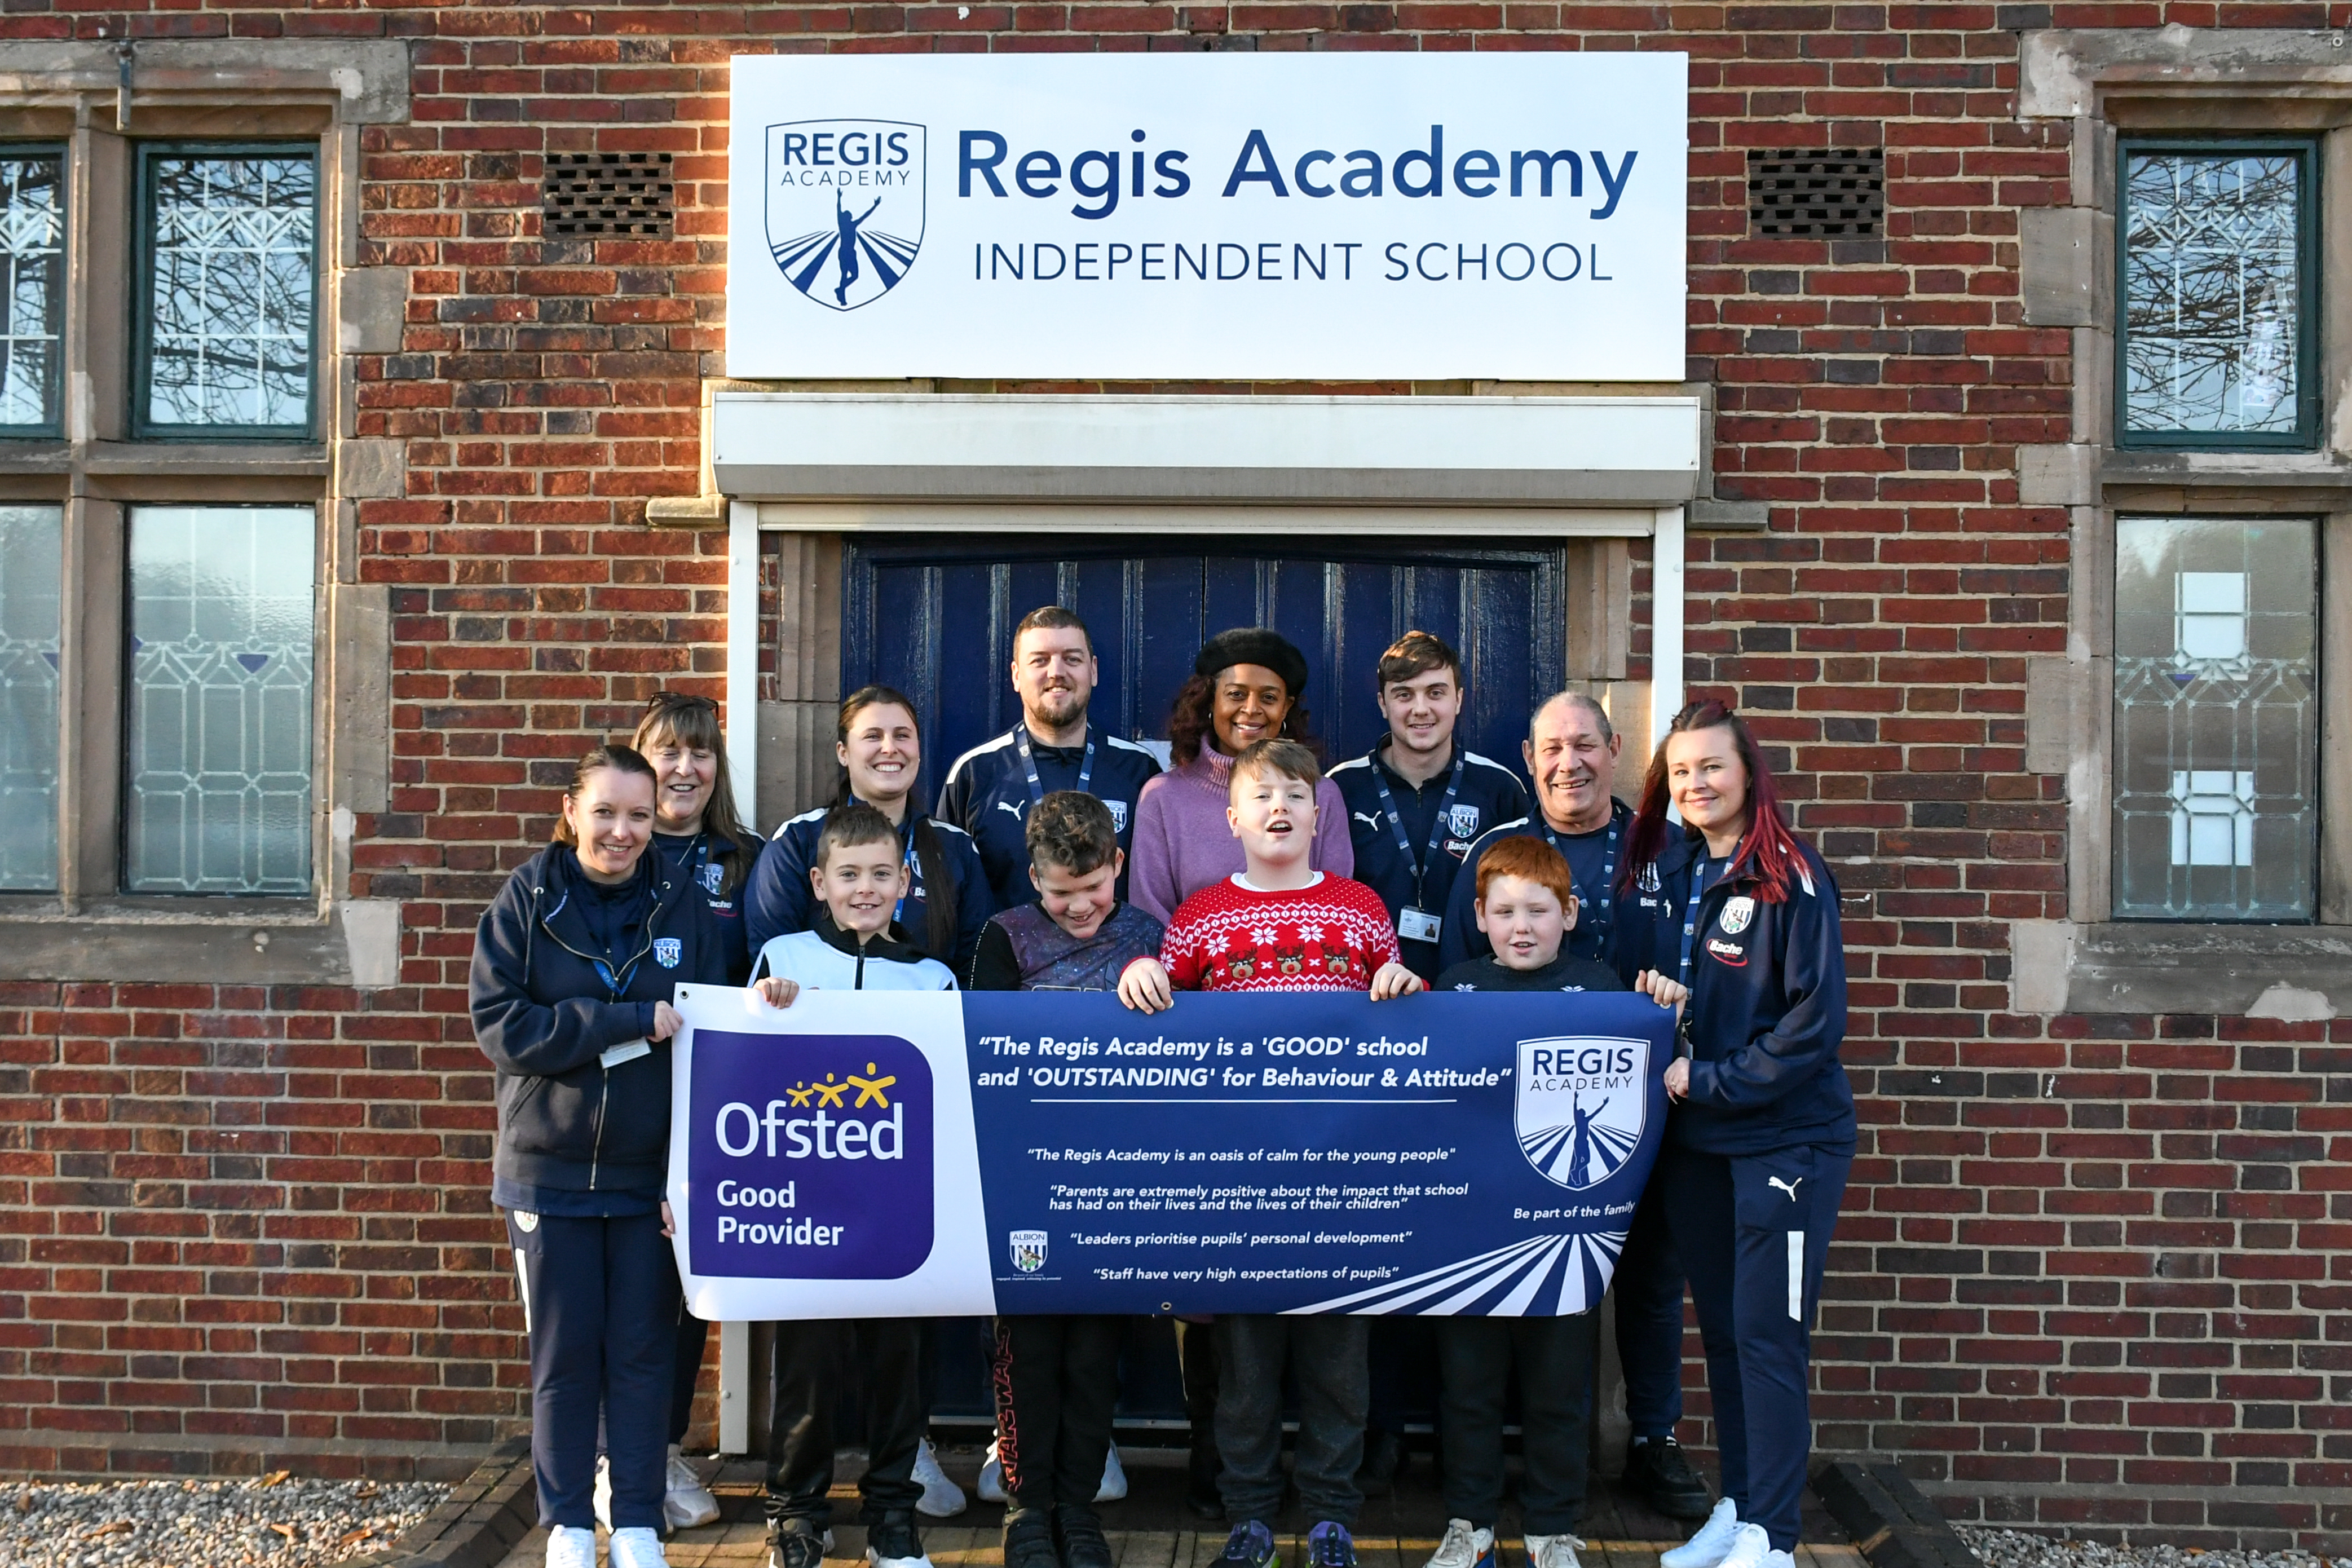 Julia Regis with staff and student outside The Regis Academy